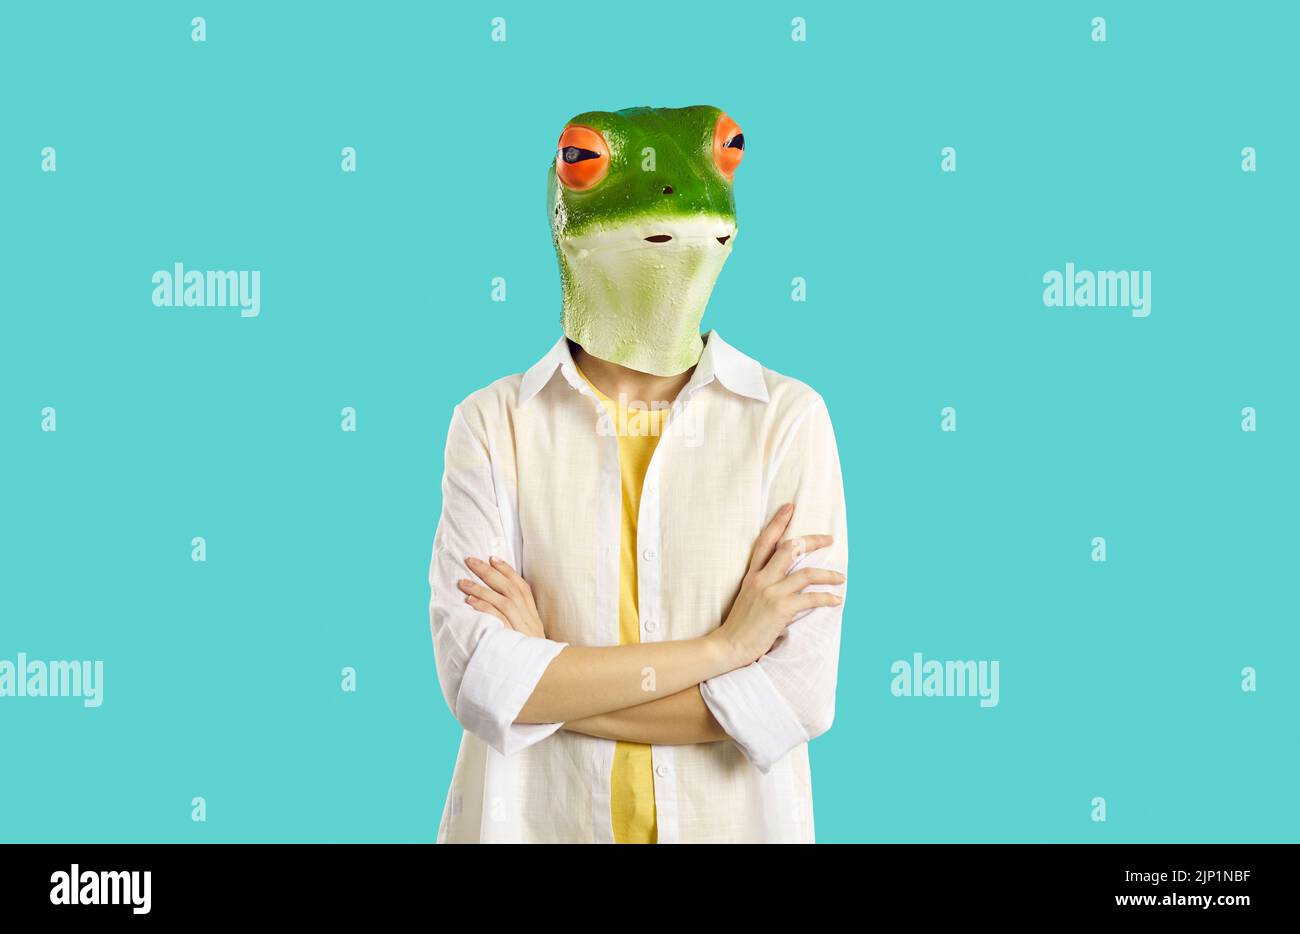 Woman in funny frog mask with sceptical face expression standing with her arms folded Stock Photo